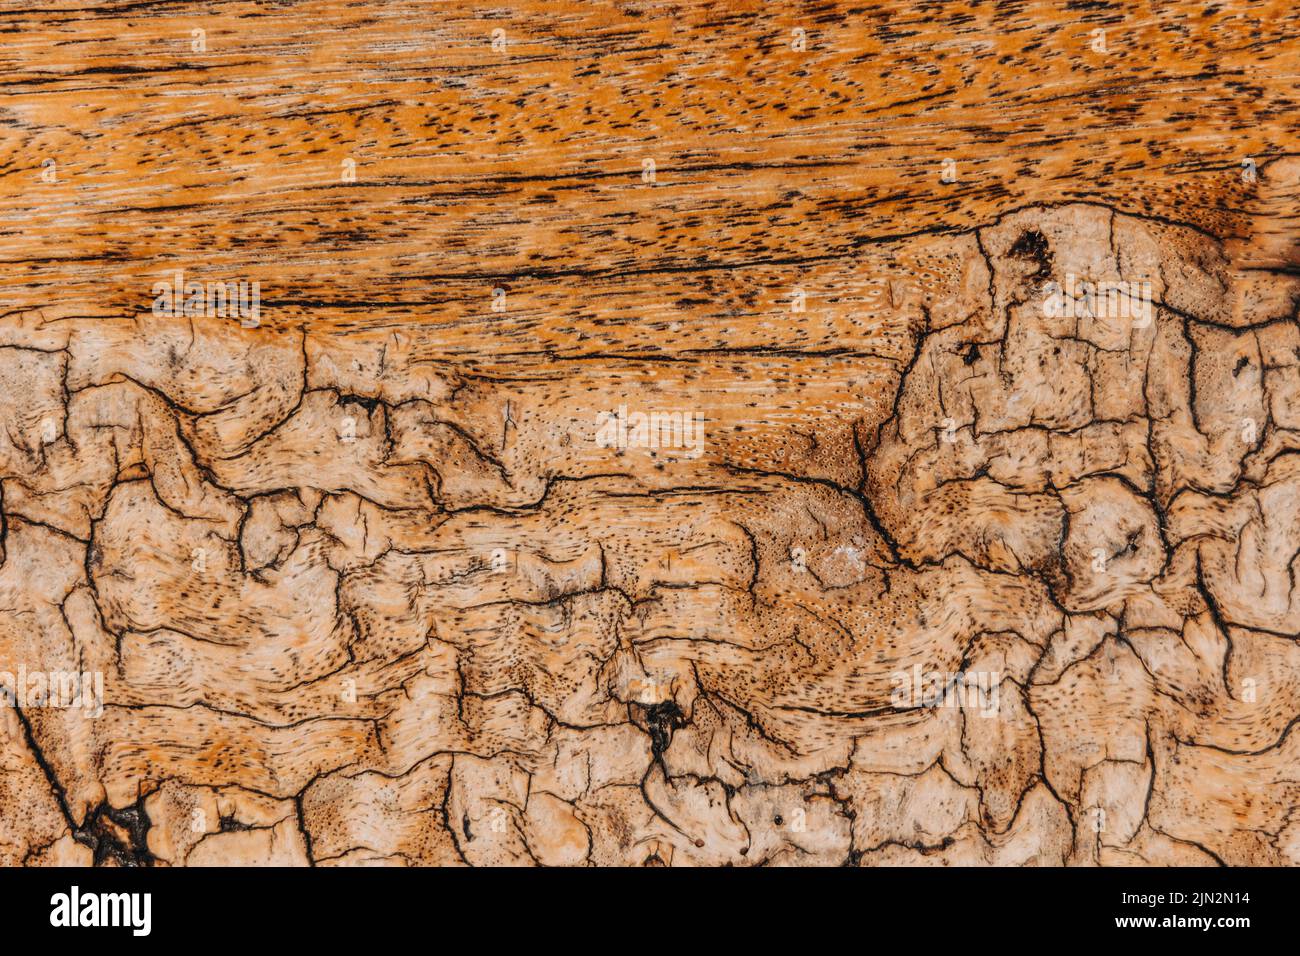 Close-up old cracked wooden surface, textured wooden background. The surface of the old brown wood texture. Stock Photo